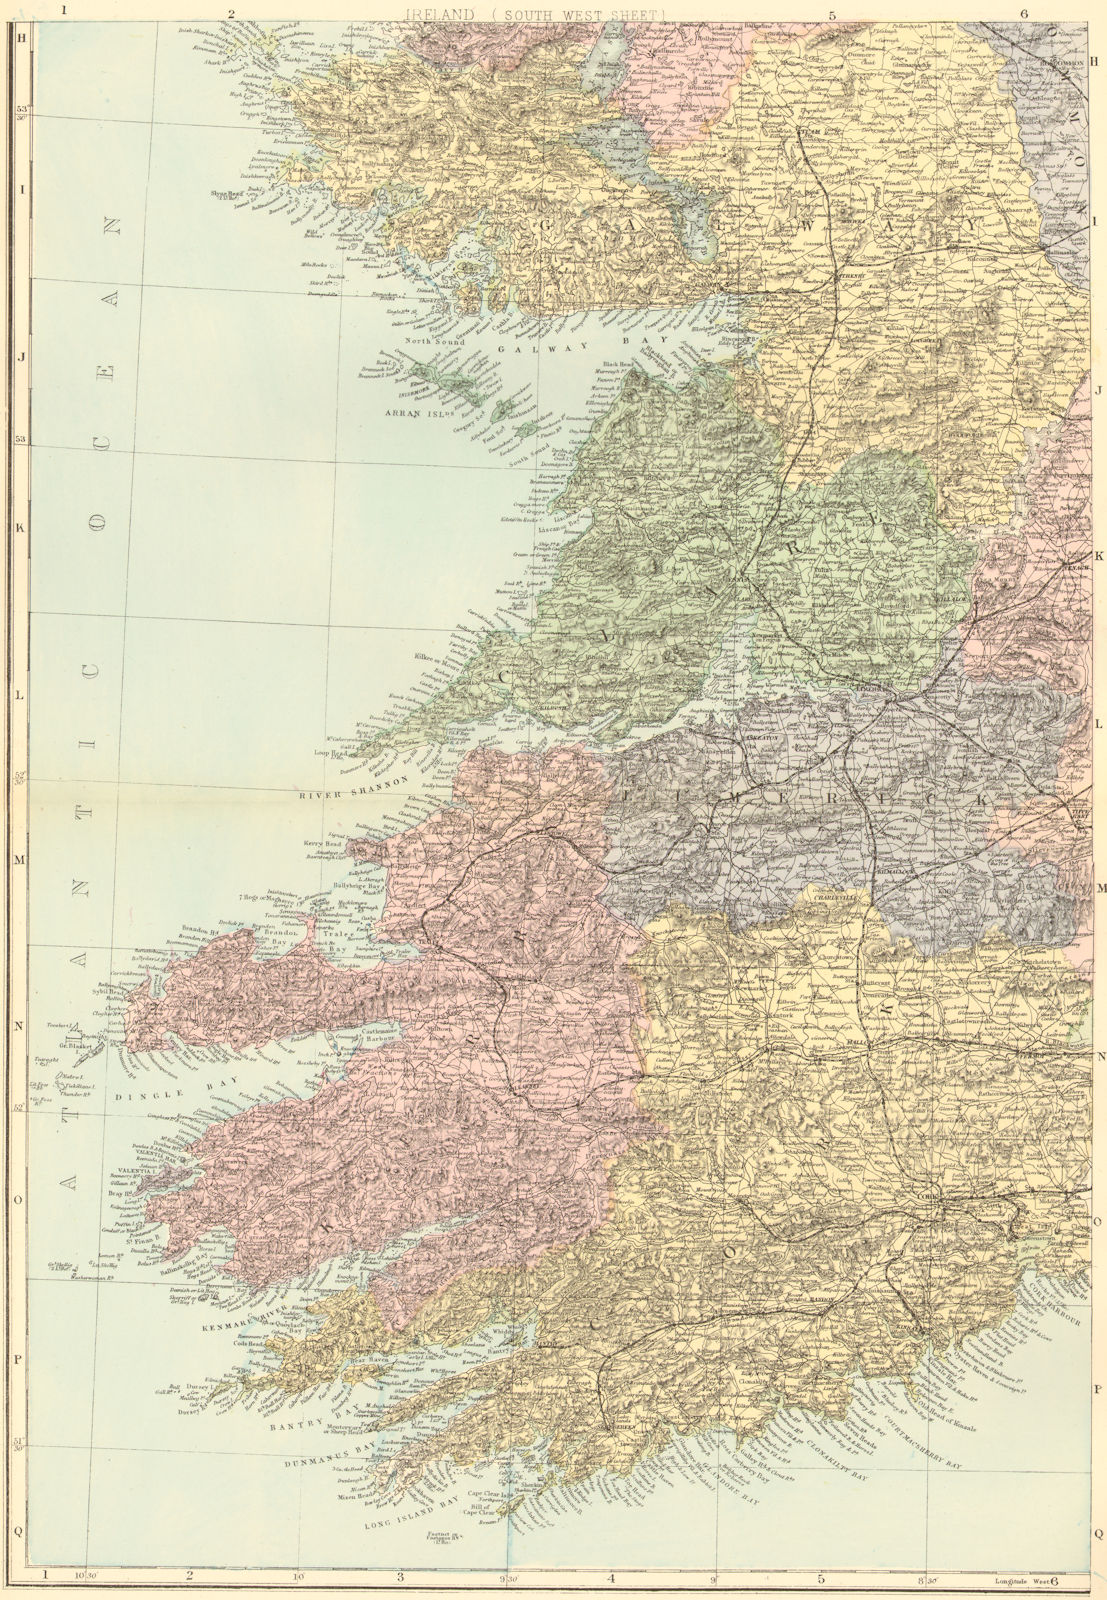 IRELAND (South West). Munster. Cork Kerry Clare Limerick. GW BACON 1884 map